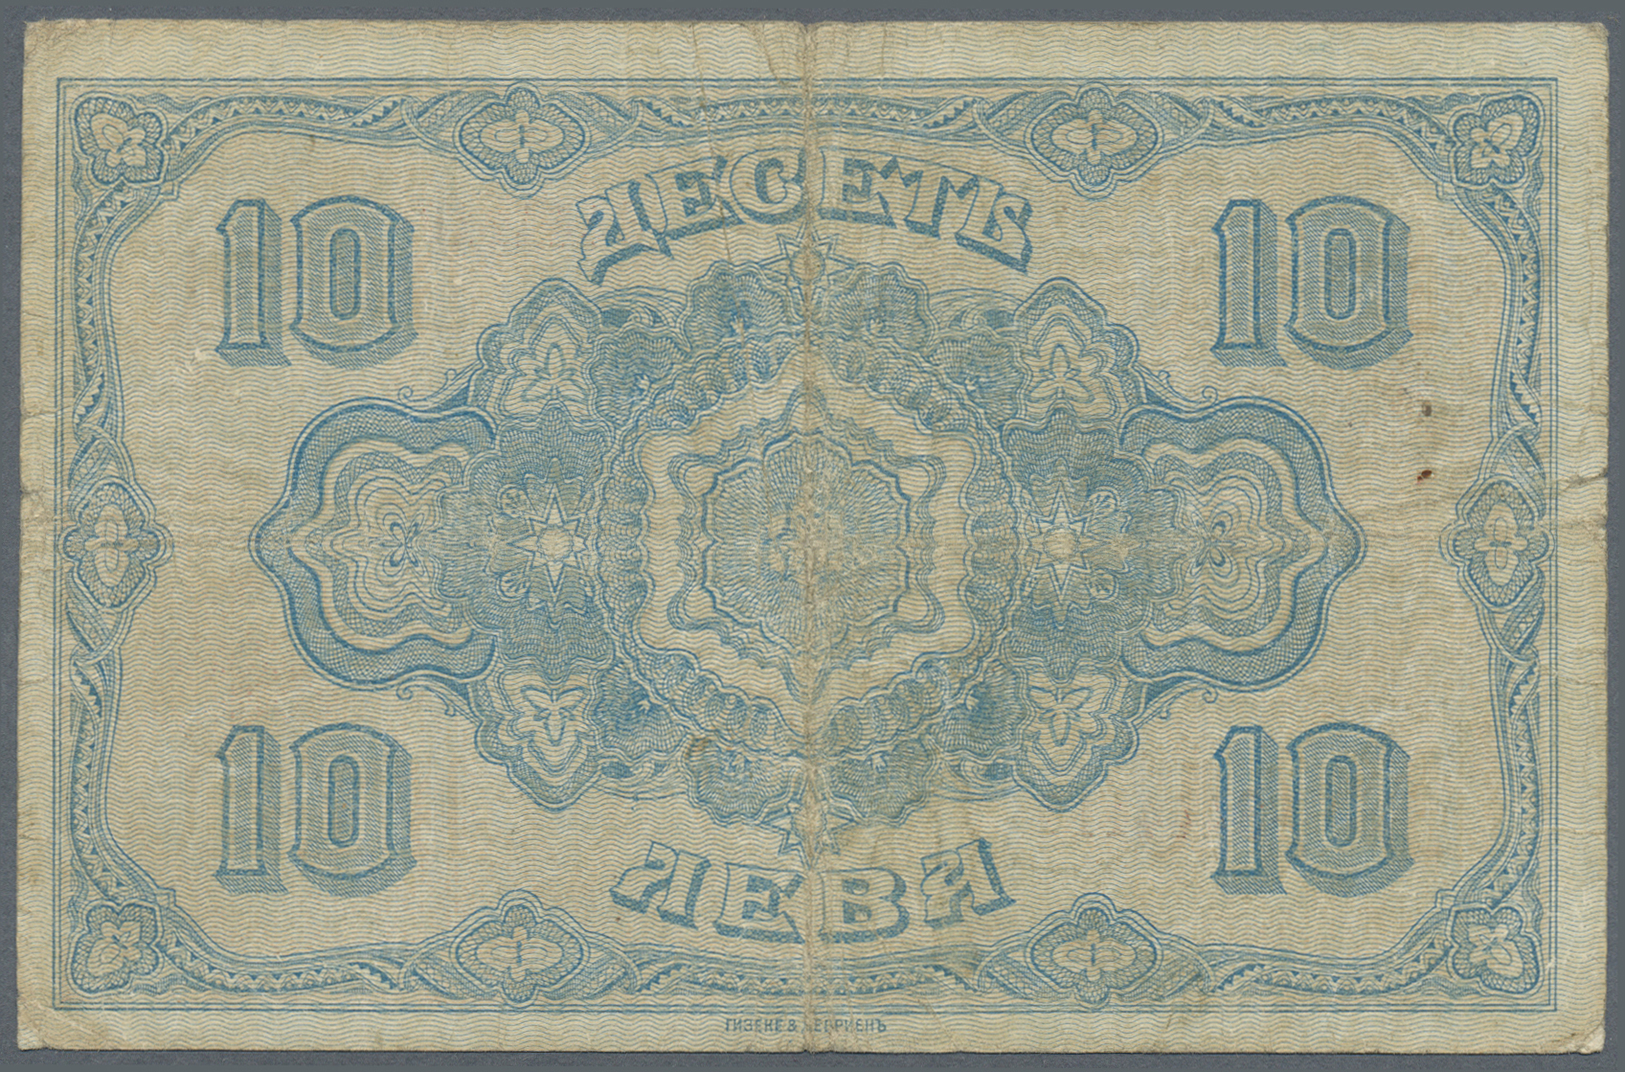 00385 Bulgaria / Bulgarien: 10 Leva ND(1917) P. 22a With Color Print Error, While The Original Note Is Printed In Brown, - Bulgaria